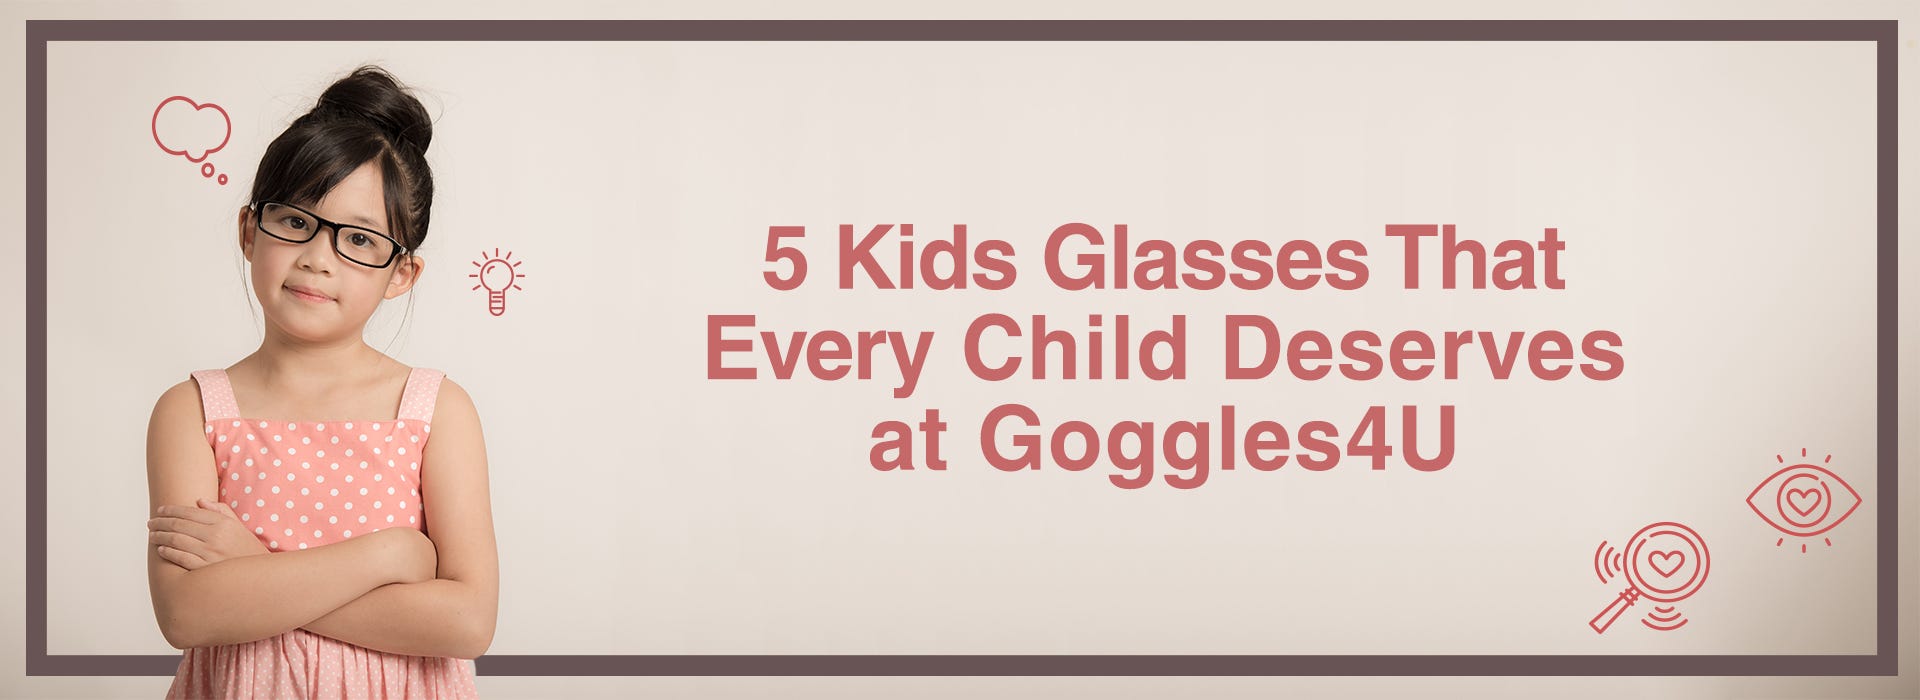 5 Kids Glasses That Every Child Deserves at Goggles4U